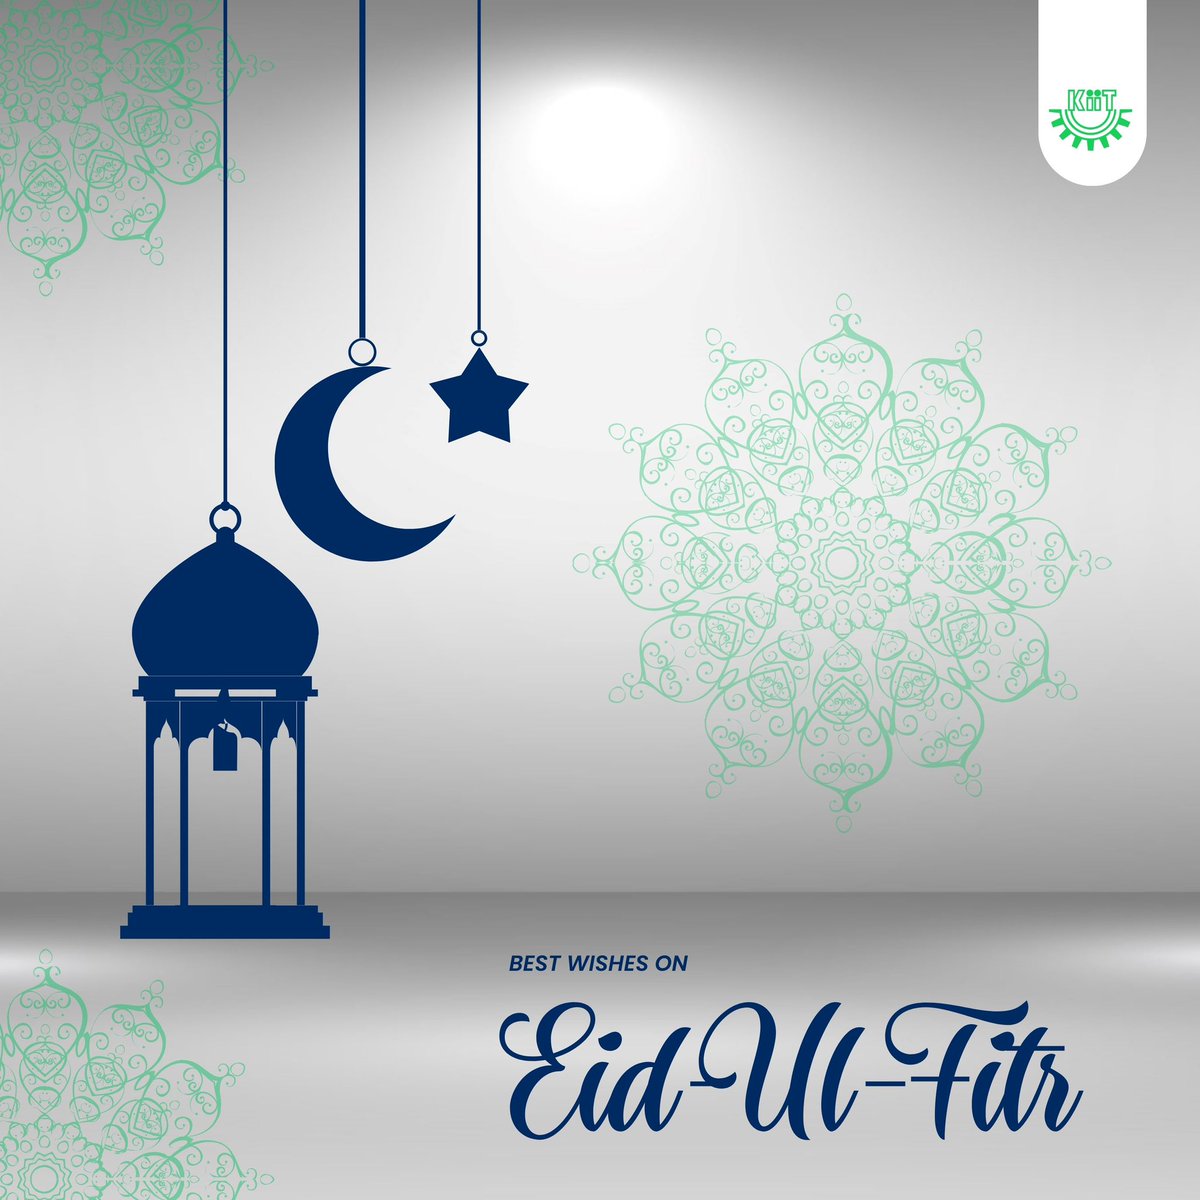 As you celebrate #Eid with family and friends, may your hearts be filled with gratitude and your homes be adorned with love and laughter. May Allah's guidance and mercy illuminate your path, granting you strength, courage, and wisdom in all your endeavours. Eid Mubarak to you and